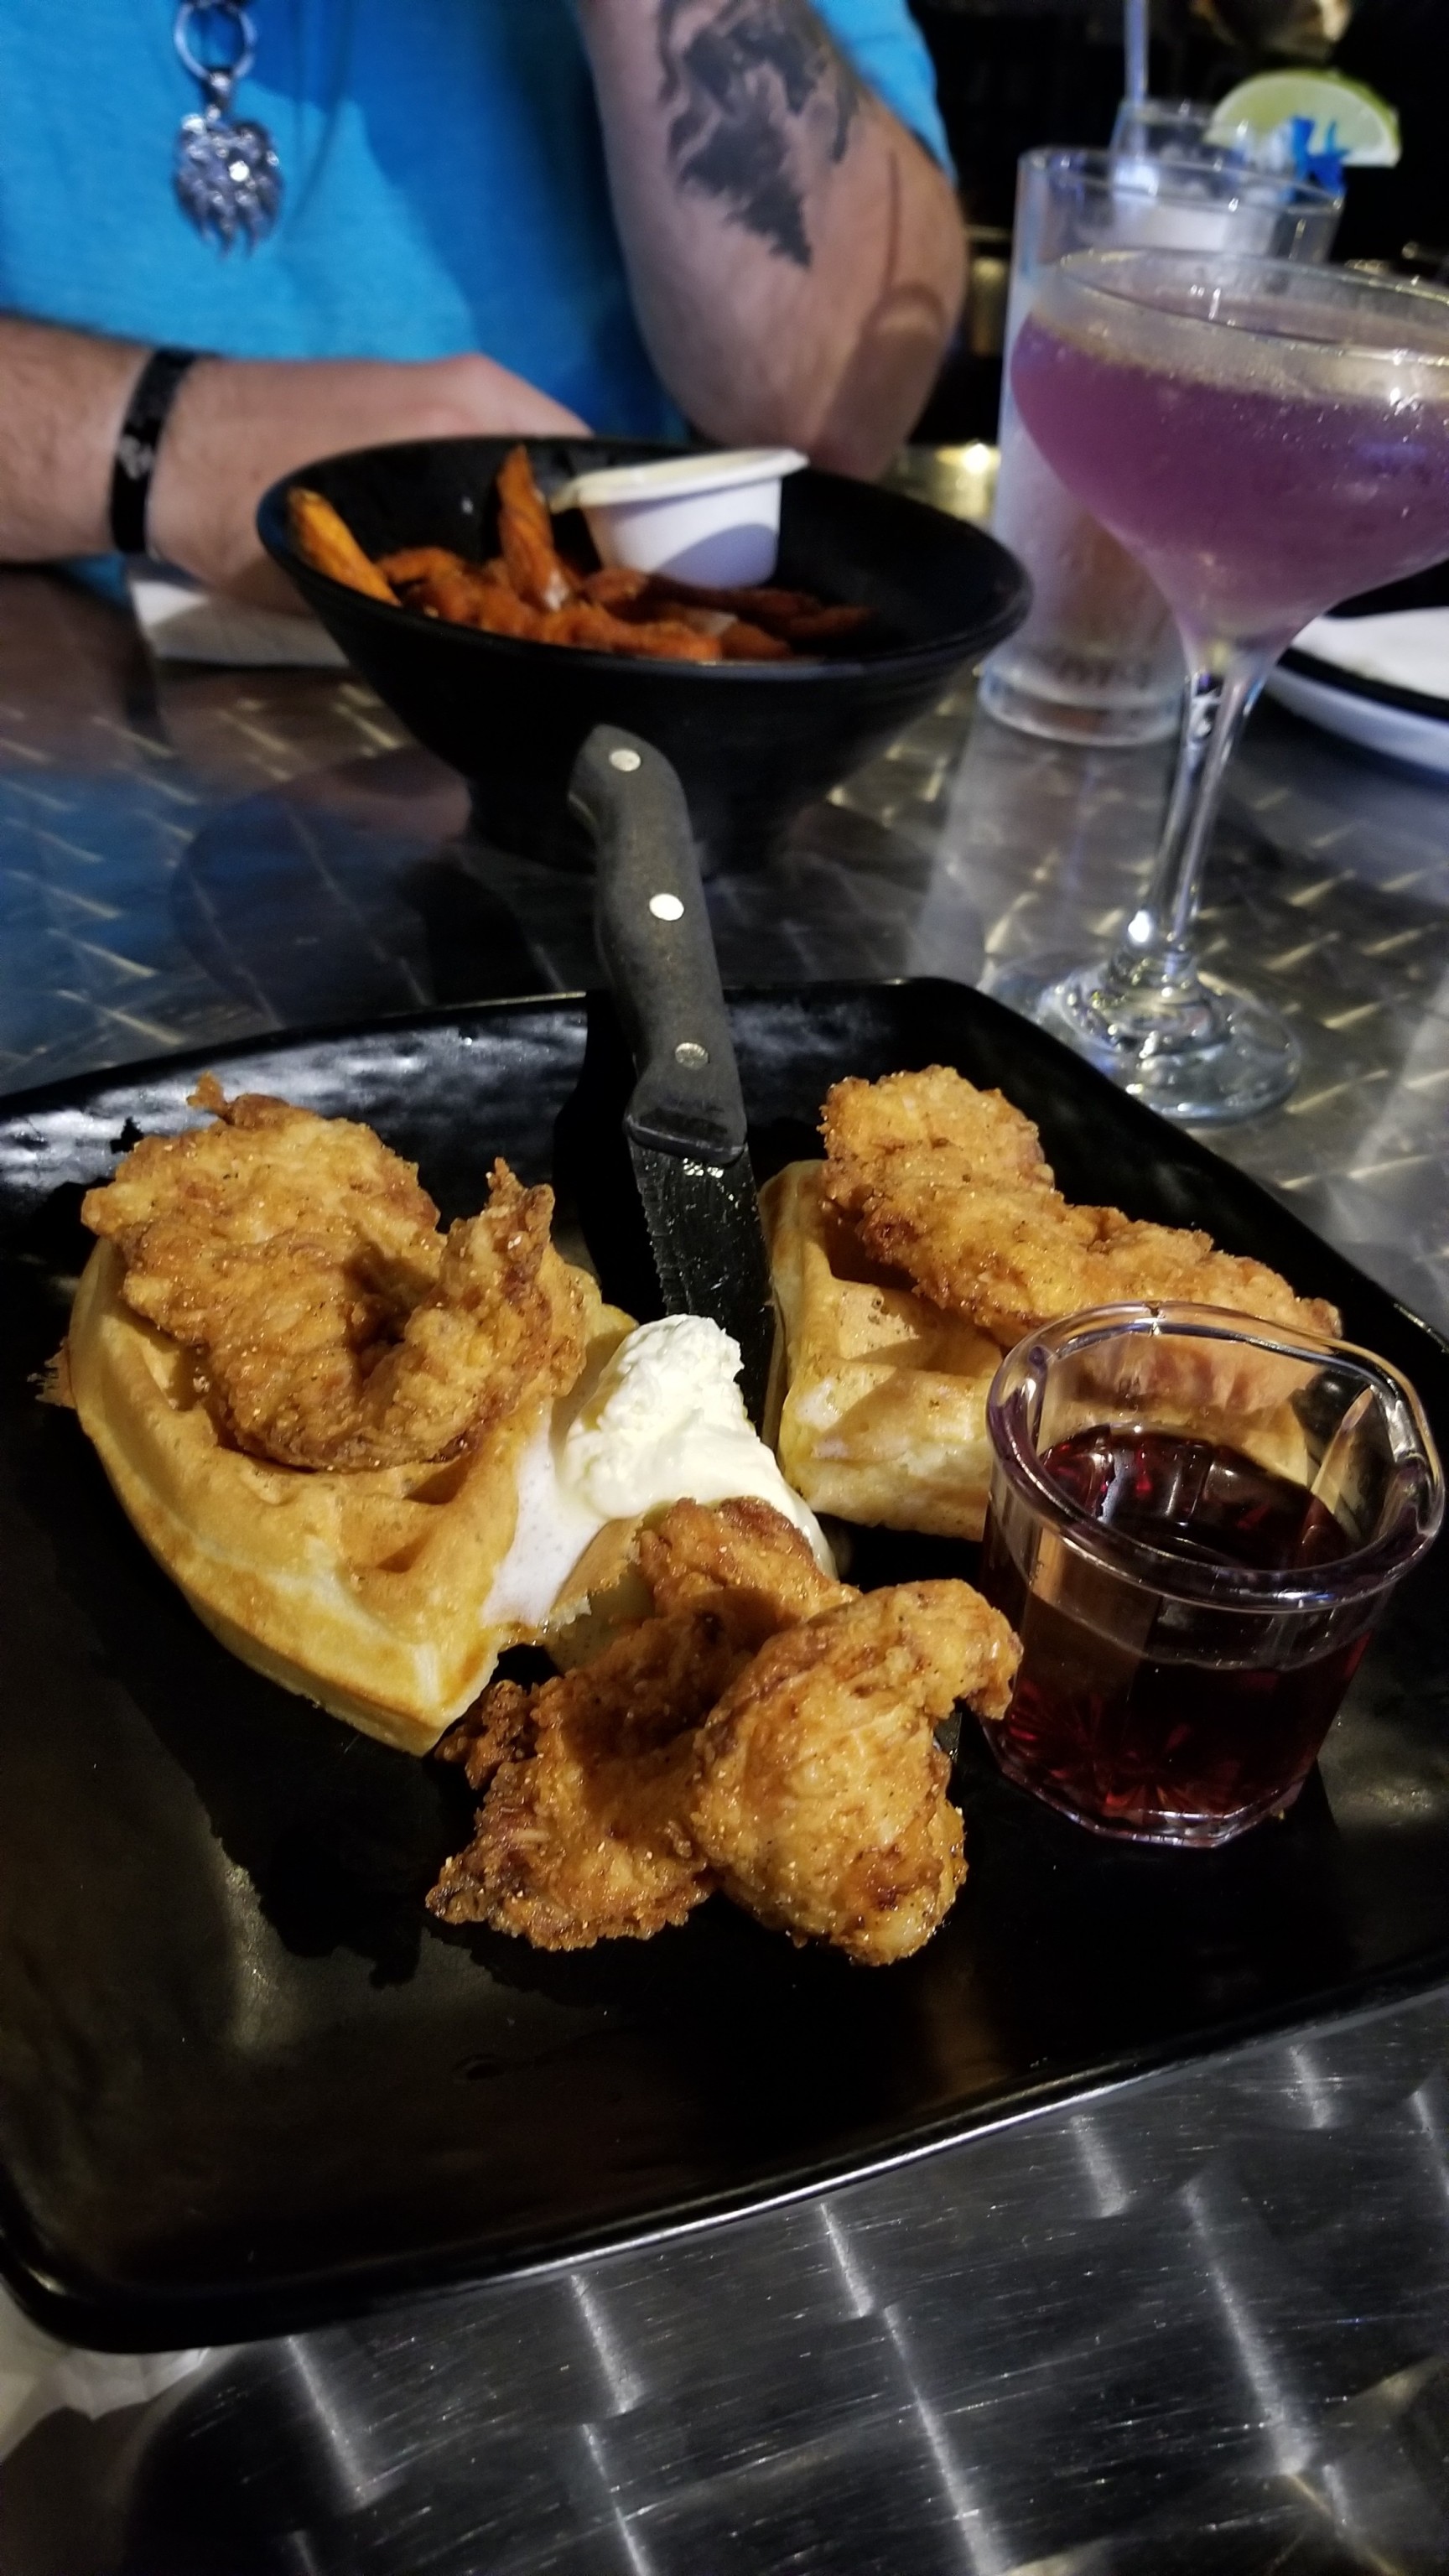 thingssthatmakemewet:@mossyoakmaster surprised me with a date night and dinner reservations at a cool restaurant/bar near our new house! 🥺🥰💖 tried chicken and waffles for the first time ever and it was delish 😍🤤 also had a พ cocktail